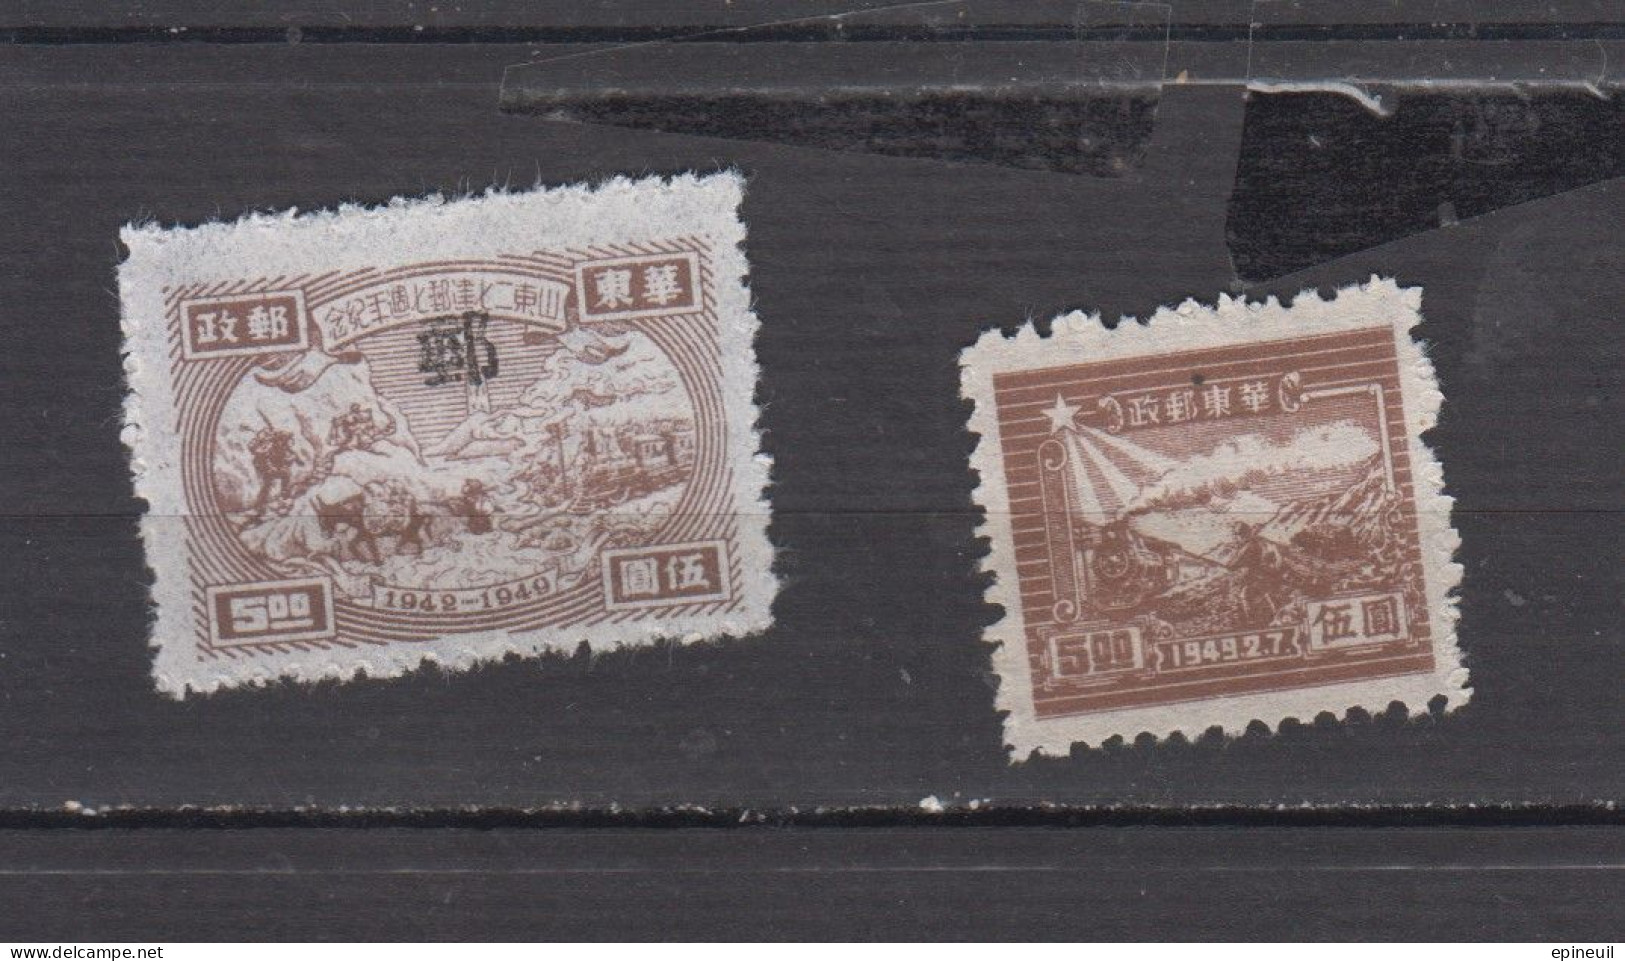 CHINE ORIENTALE 1949 YT N° 4 ET 15 - Oost-China 1949-50